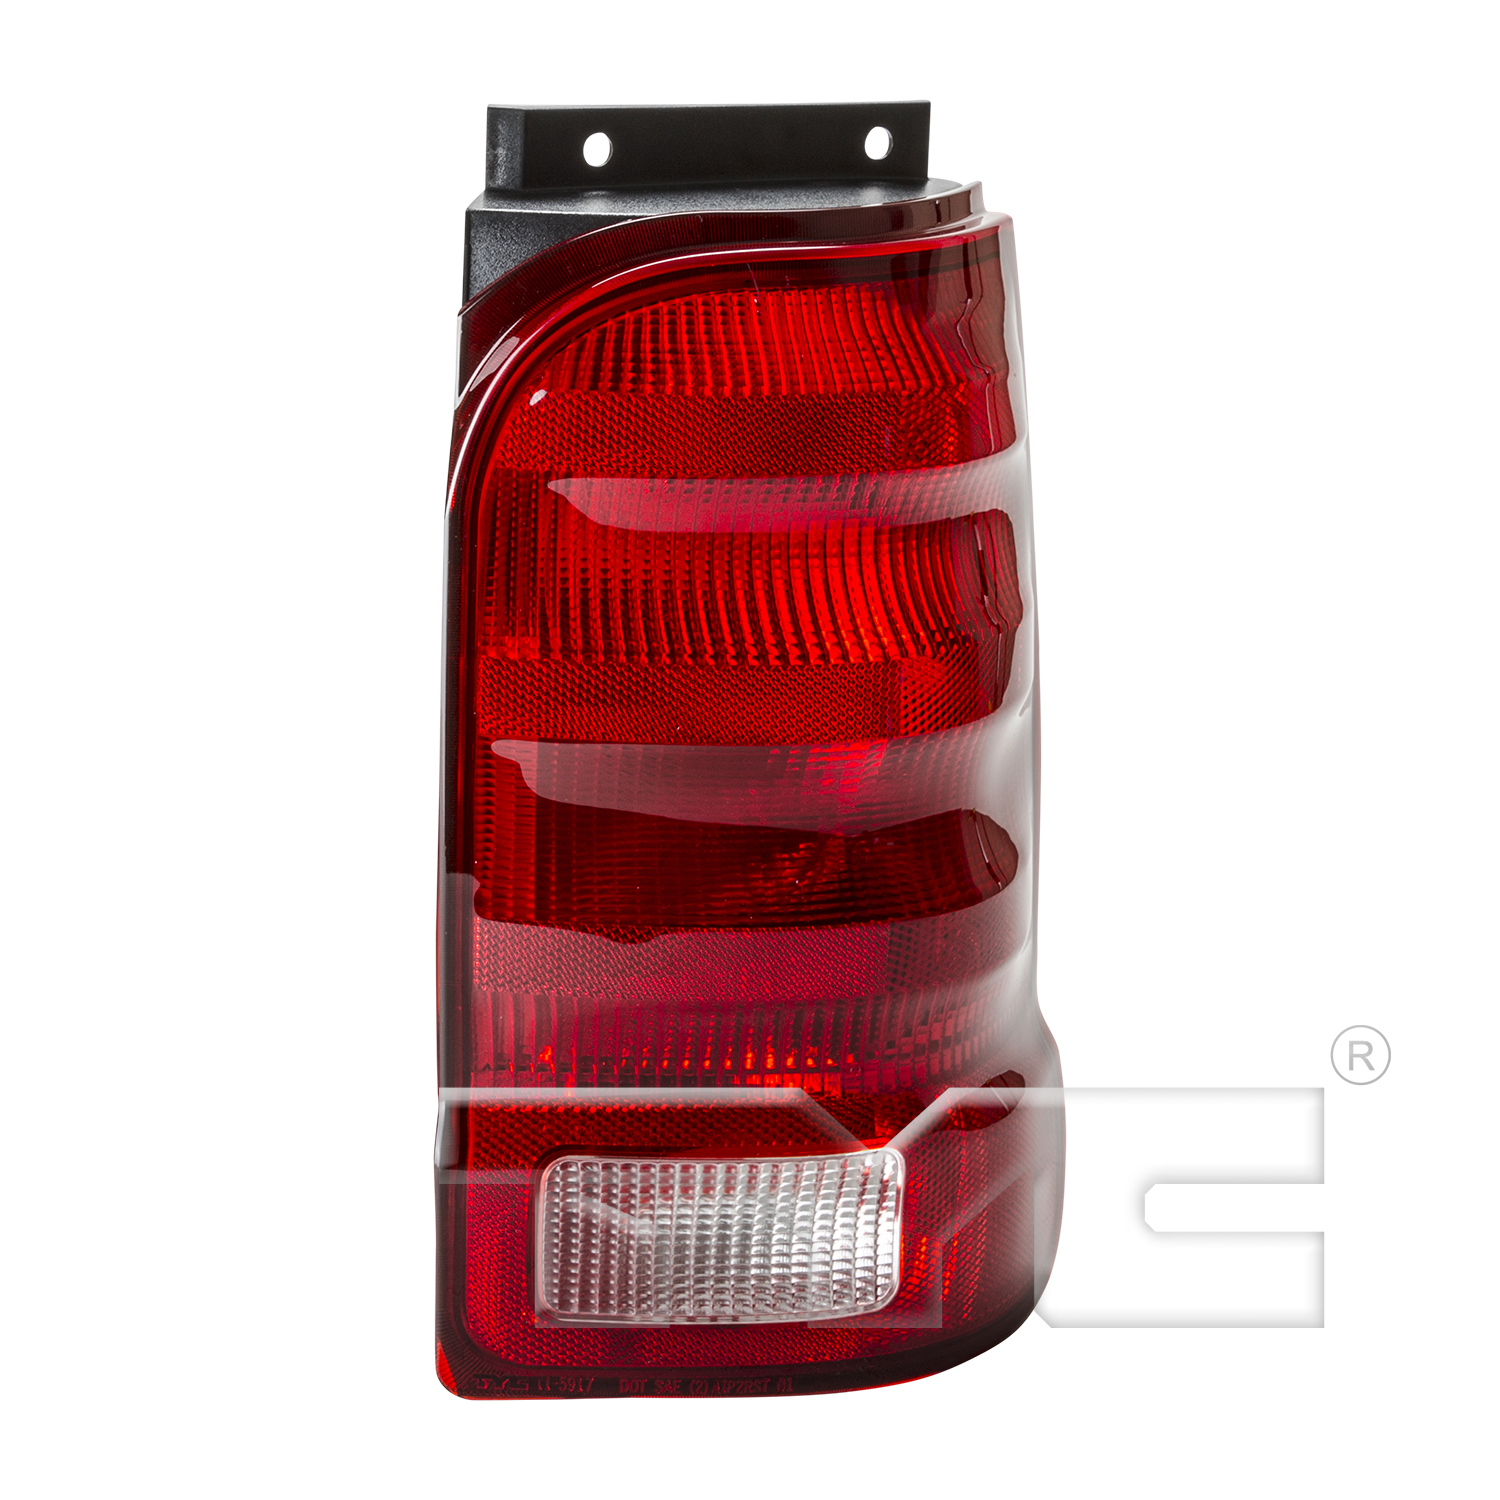 Aftermarket TAILLIGHTS for FORD - EXPLORER, EXPLORER,01-03,RT Taillamp assy